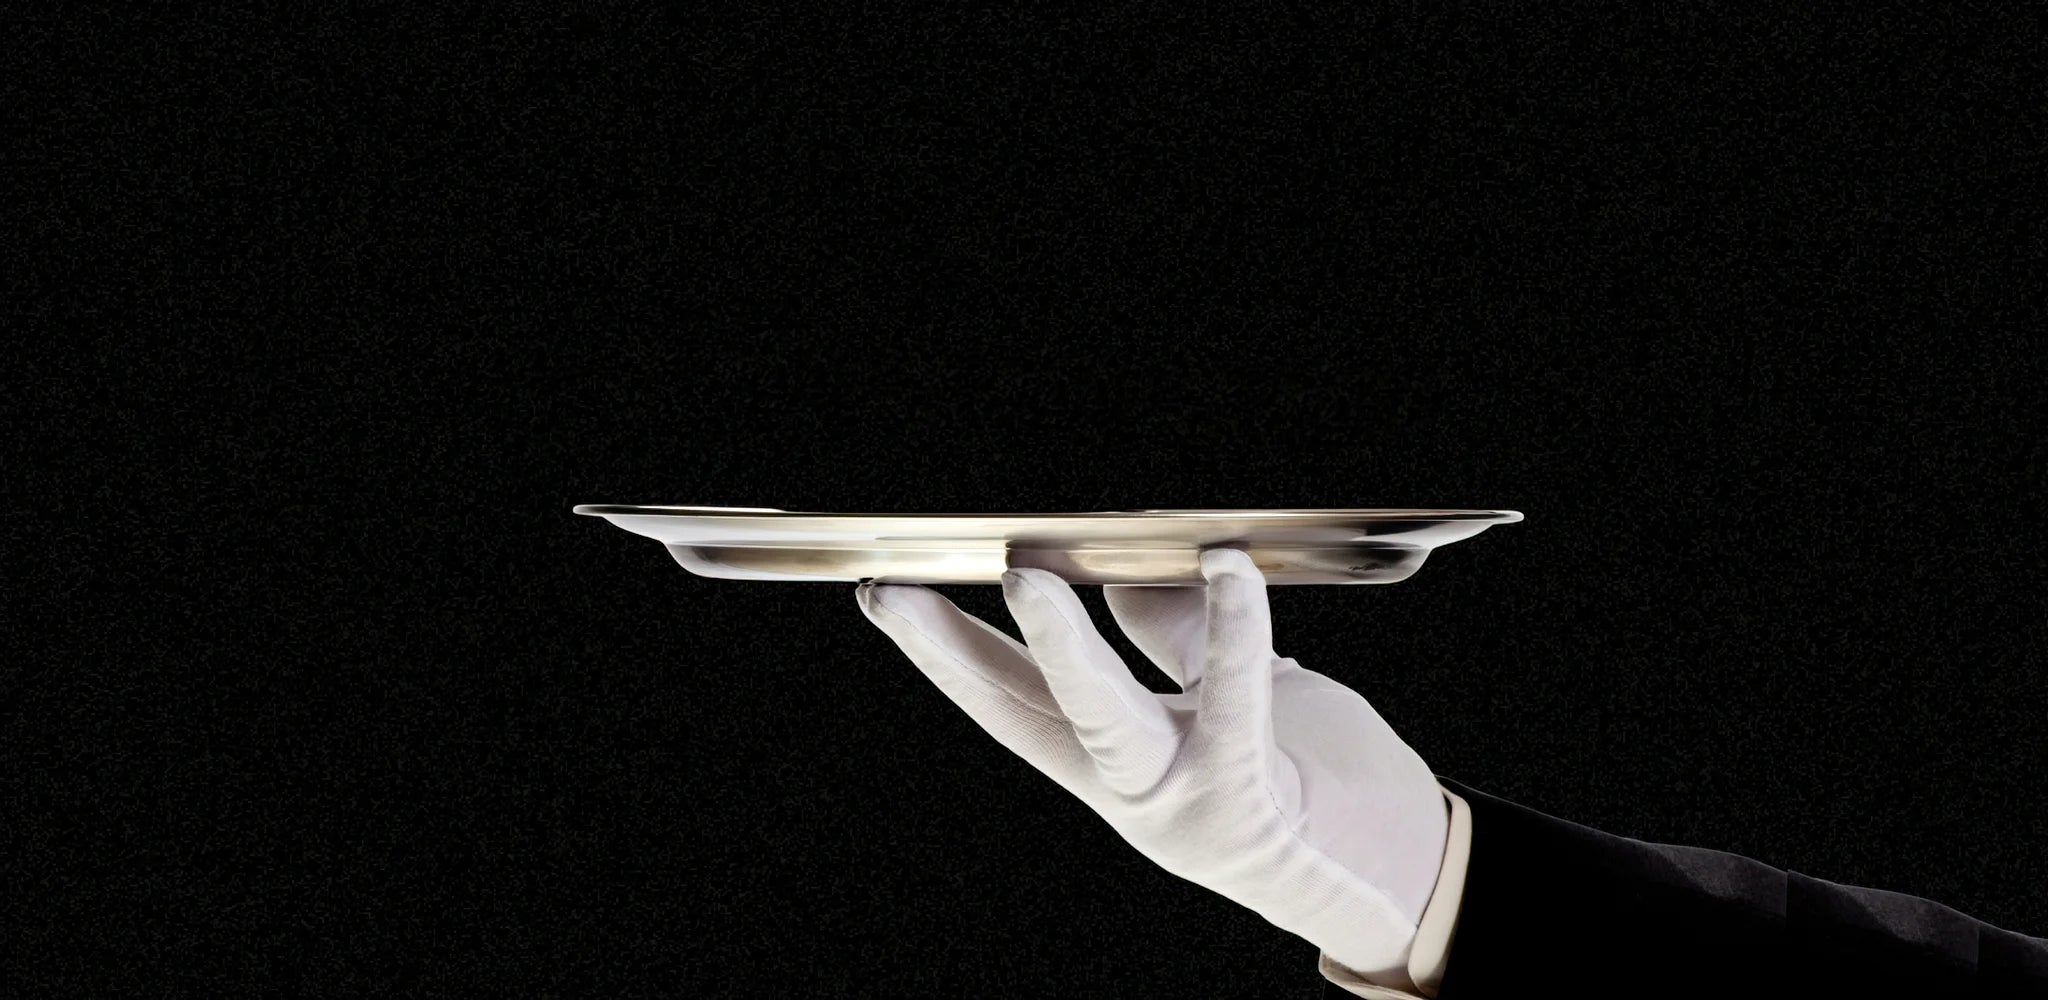 Butler with white glove holding a silver tray | WALL ART  by Sonia